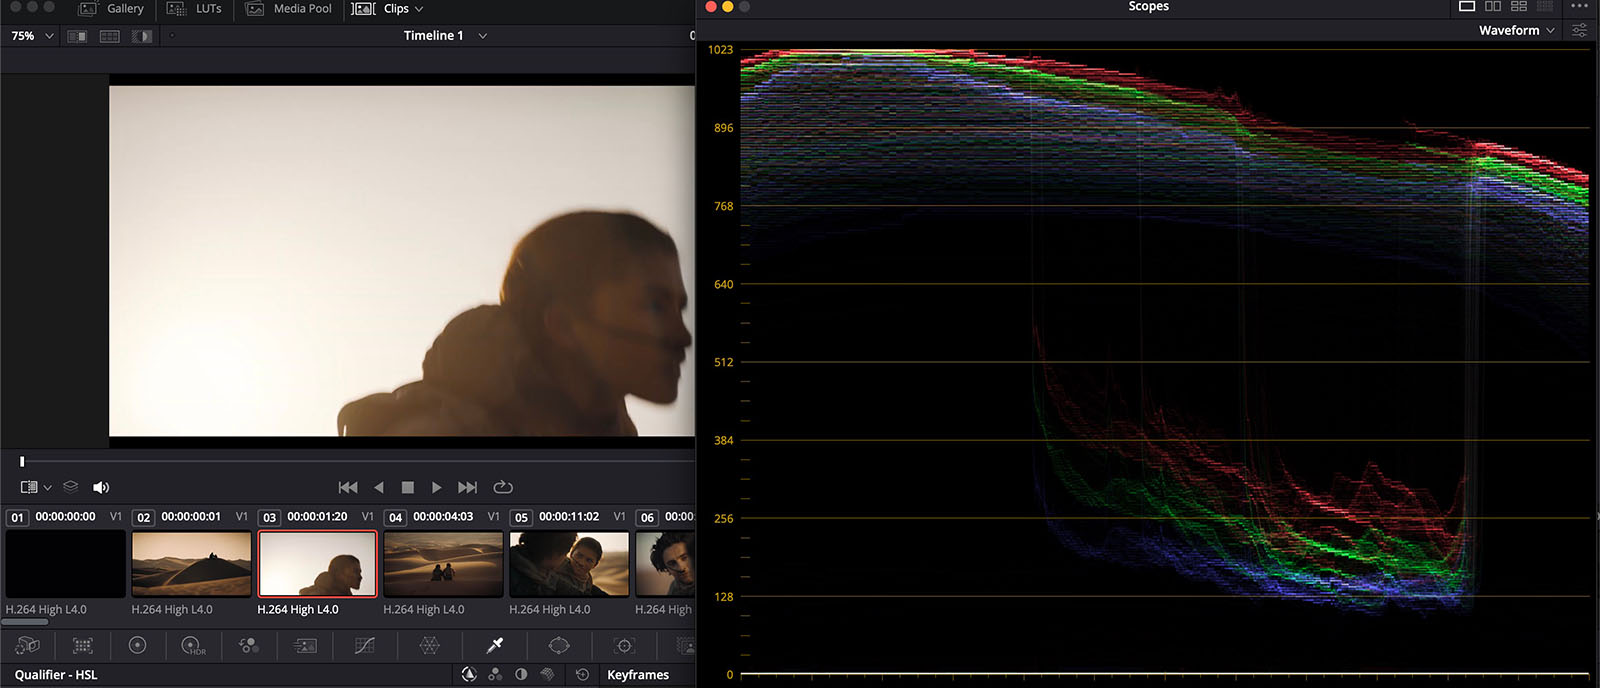 DaVinci Resolve’s Waveform Monitor reads the image from left to right and maps the brightness against a default 10-bit scale of 0-1023.